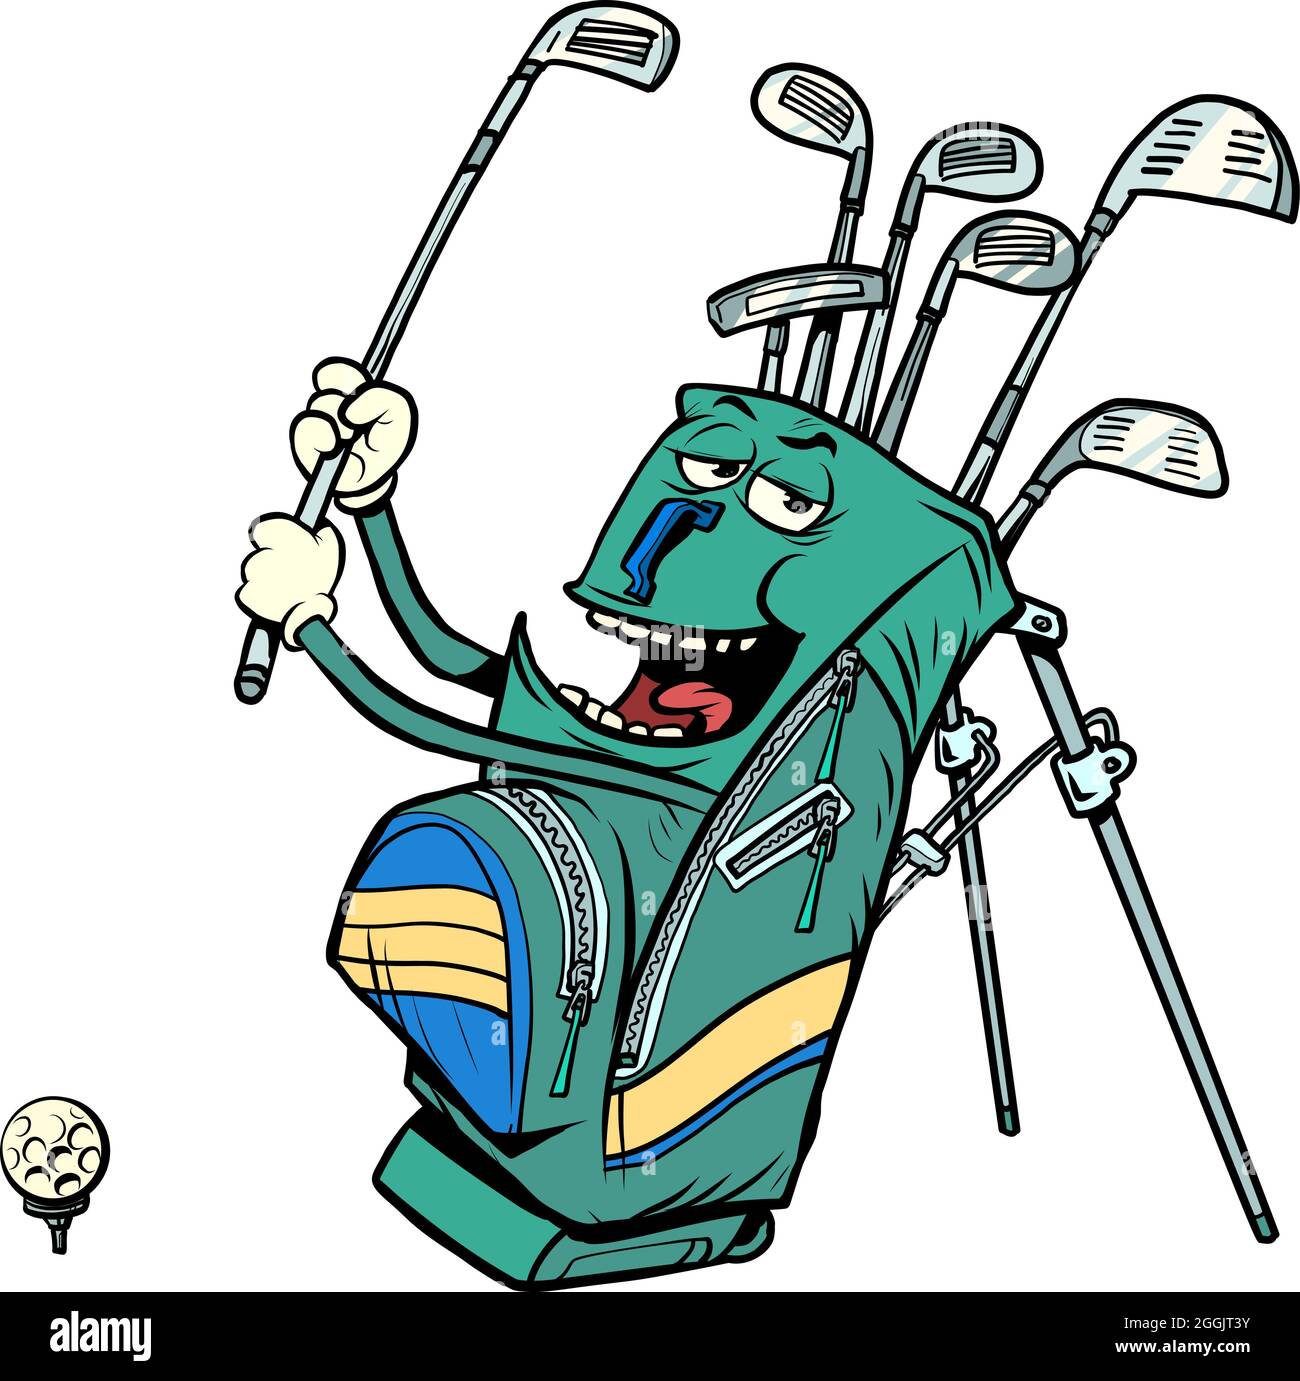 golf bag funny character, clubs and sports equipment, golf club Stock Vector